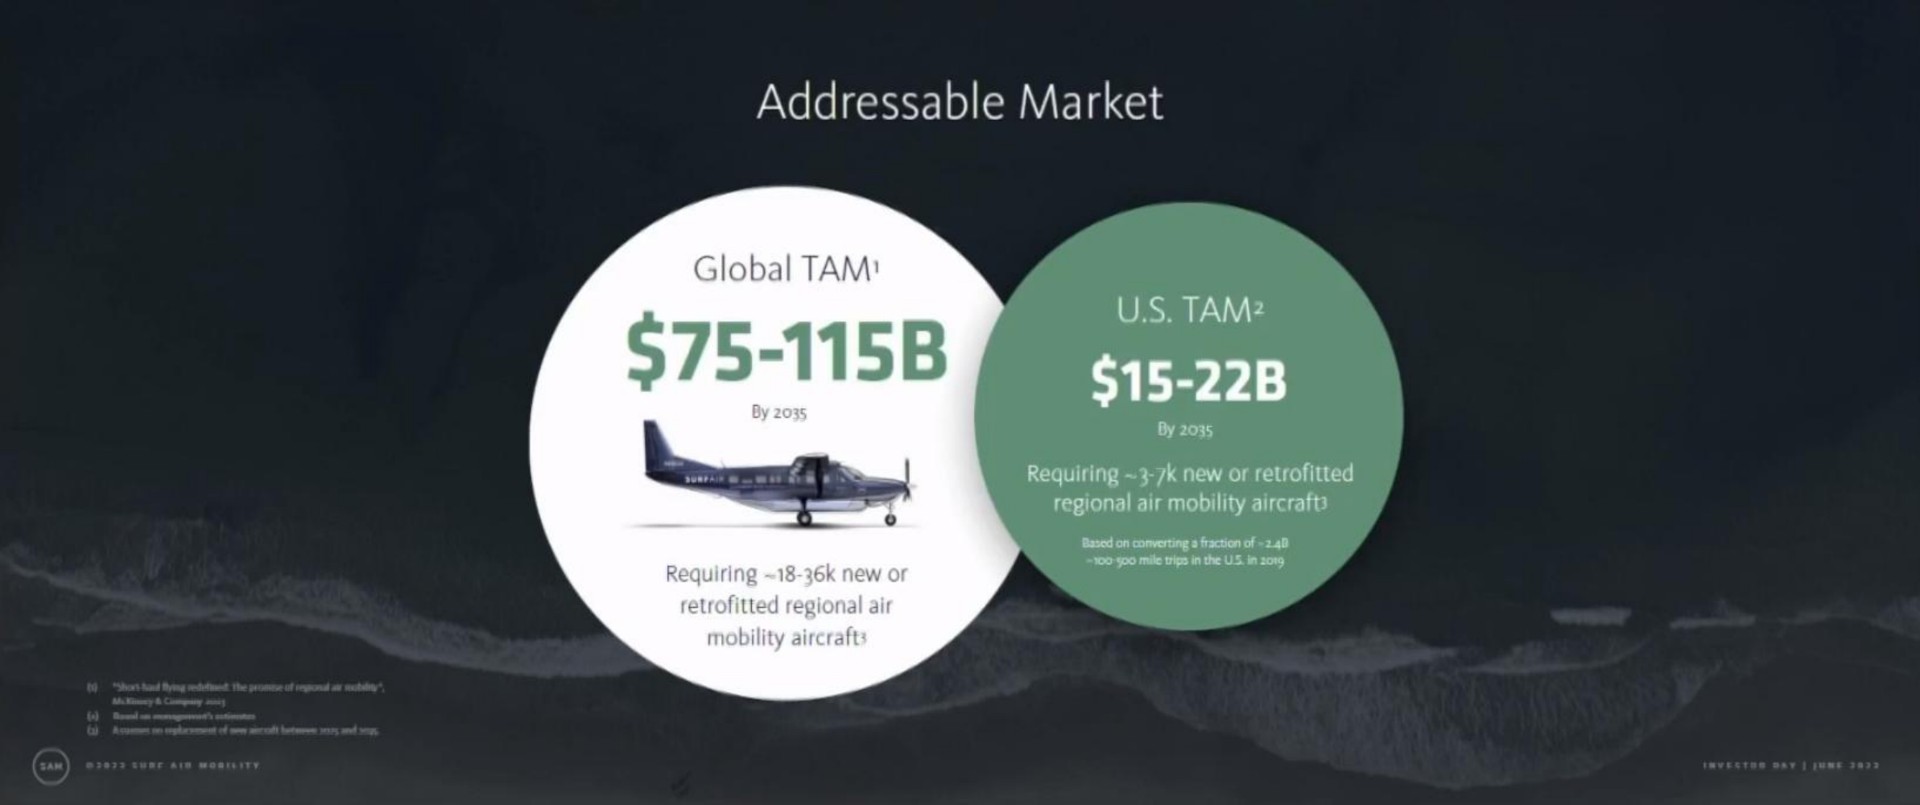 global tam market be a ors be regional air mobility aircrafts | Surf Air